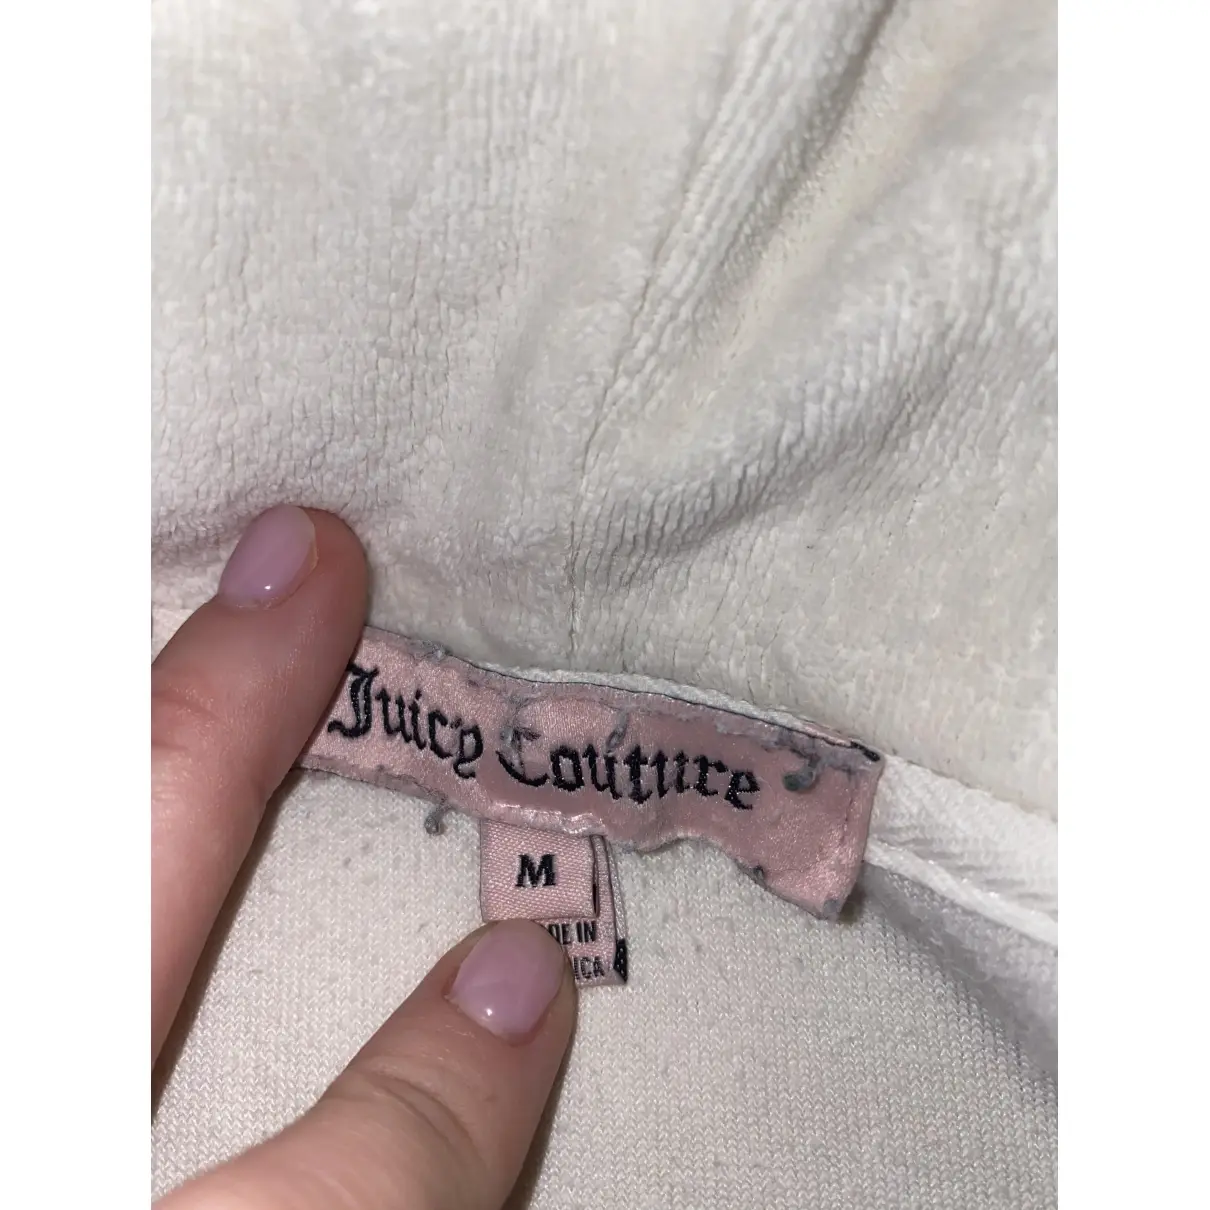 Buy Juicy Couture White Cotton Top online